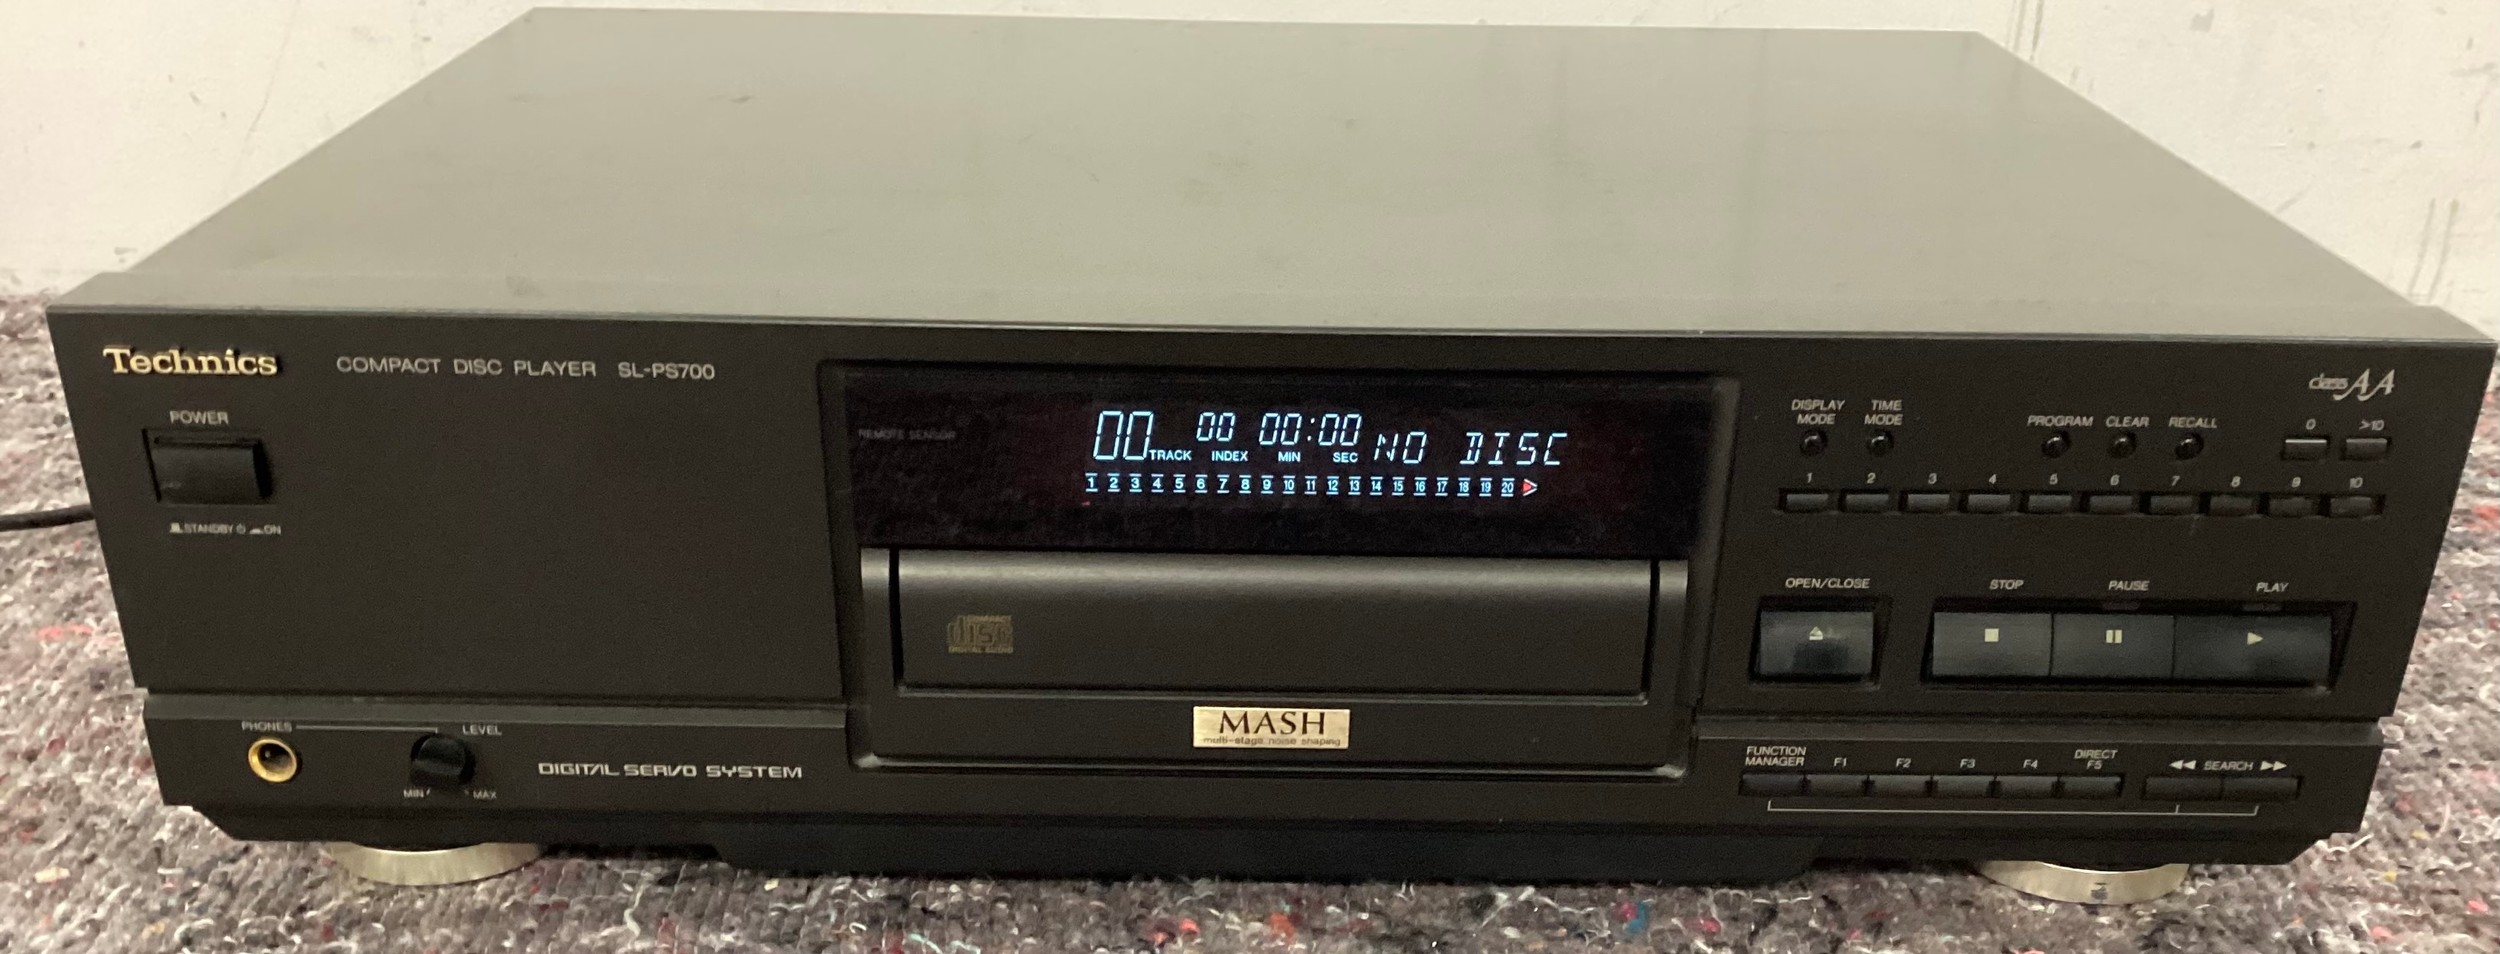 TECHNICS COMPACT DISC PLAYER. This unit powers up when plugged in and is model No. SL-PS700.